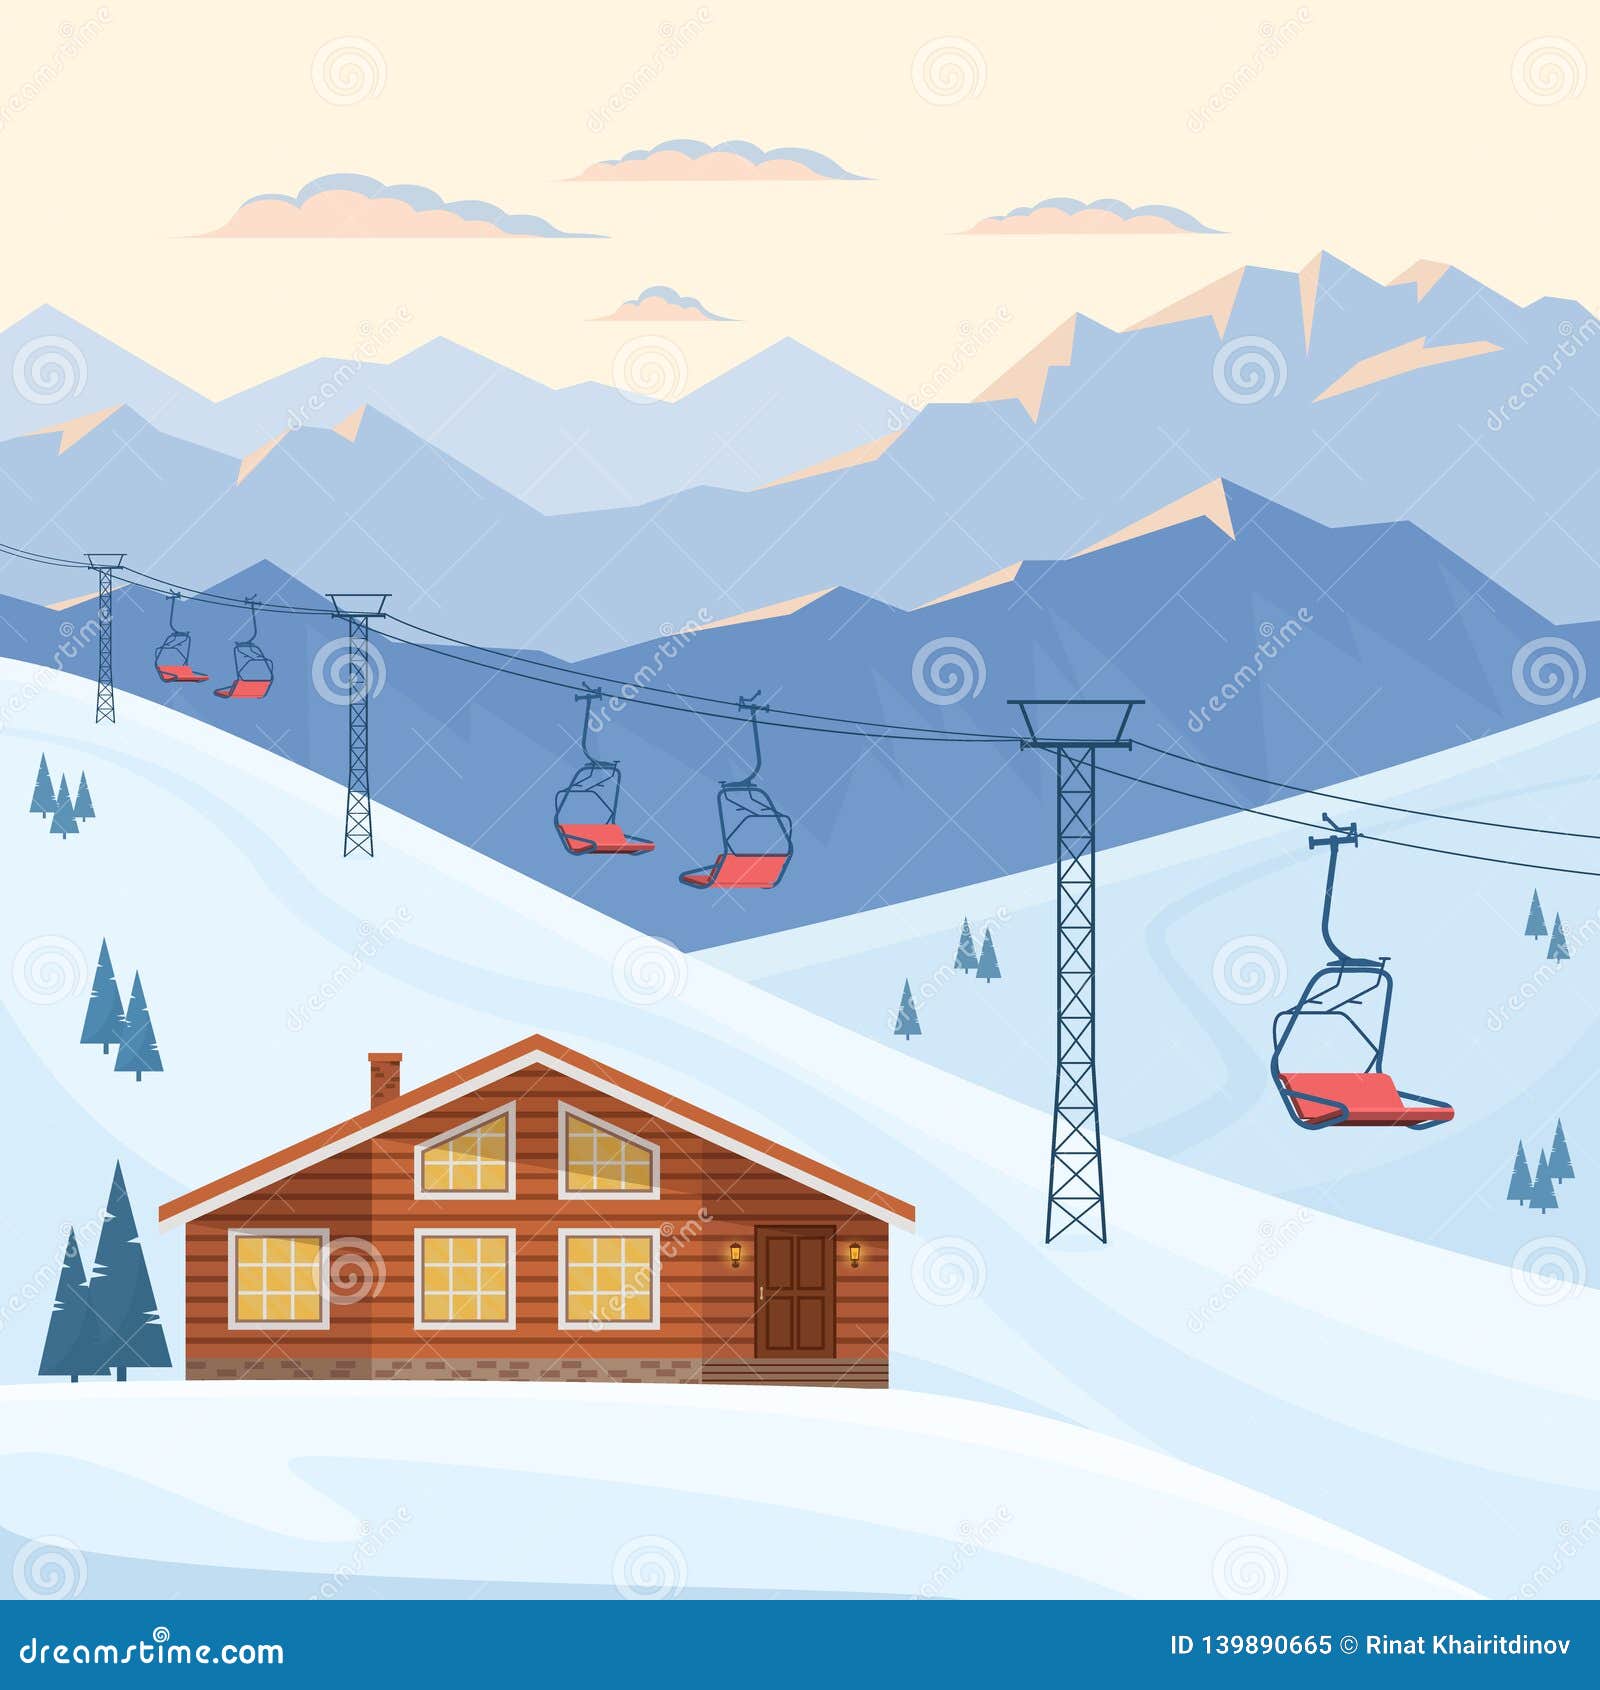 ski resort with red chair lift, house, chalet, winter mountain evening and morning landscape, snow.